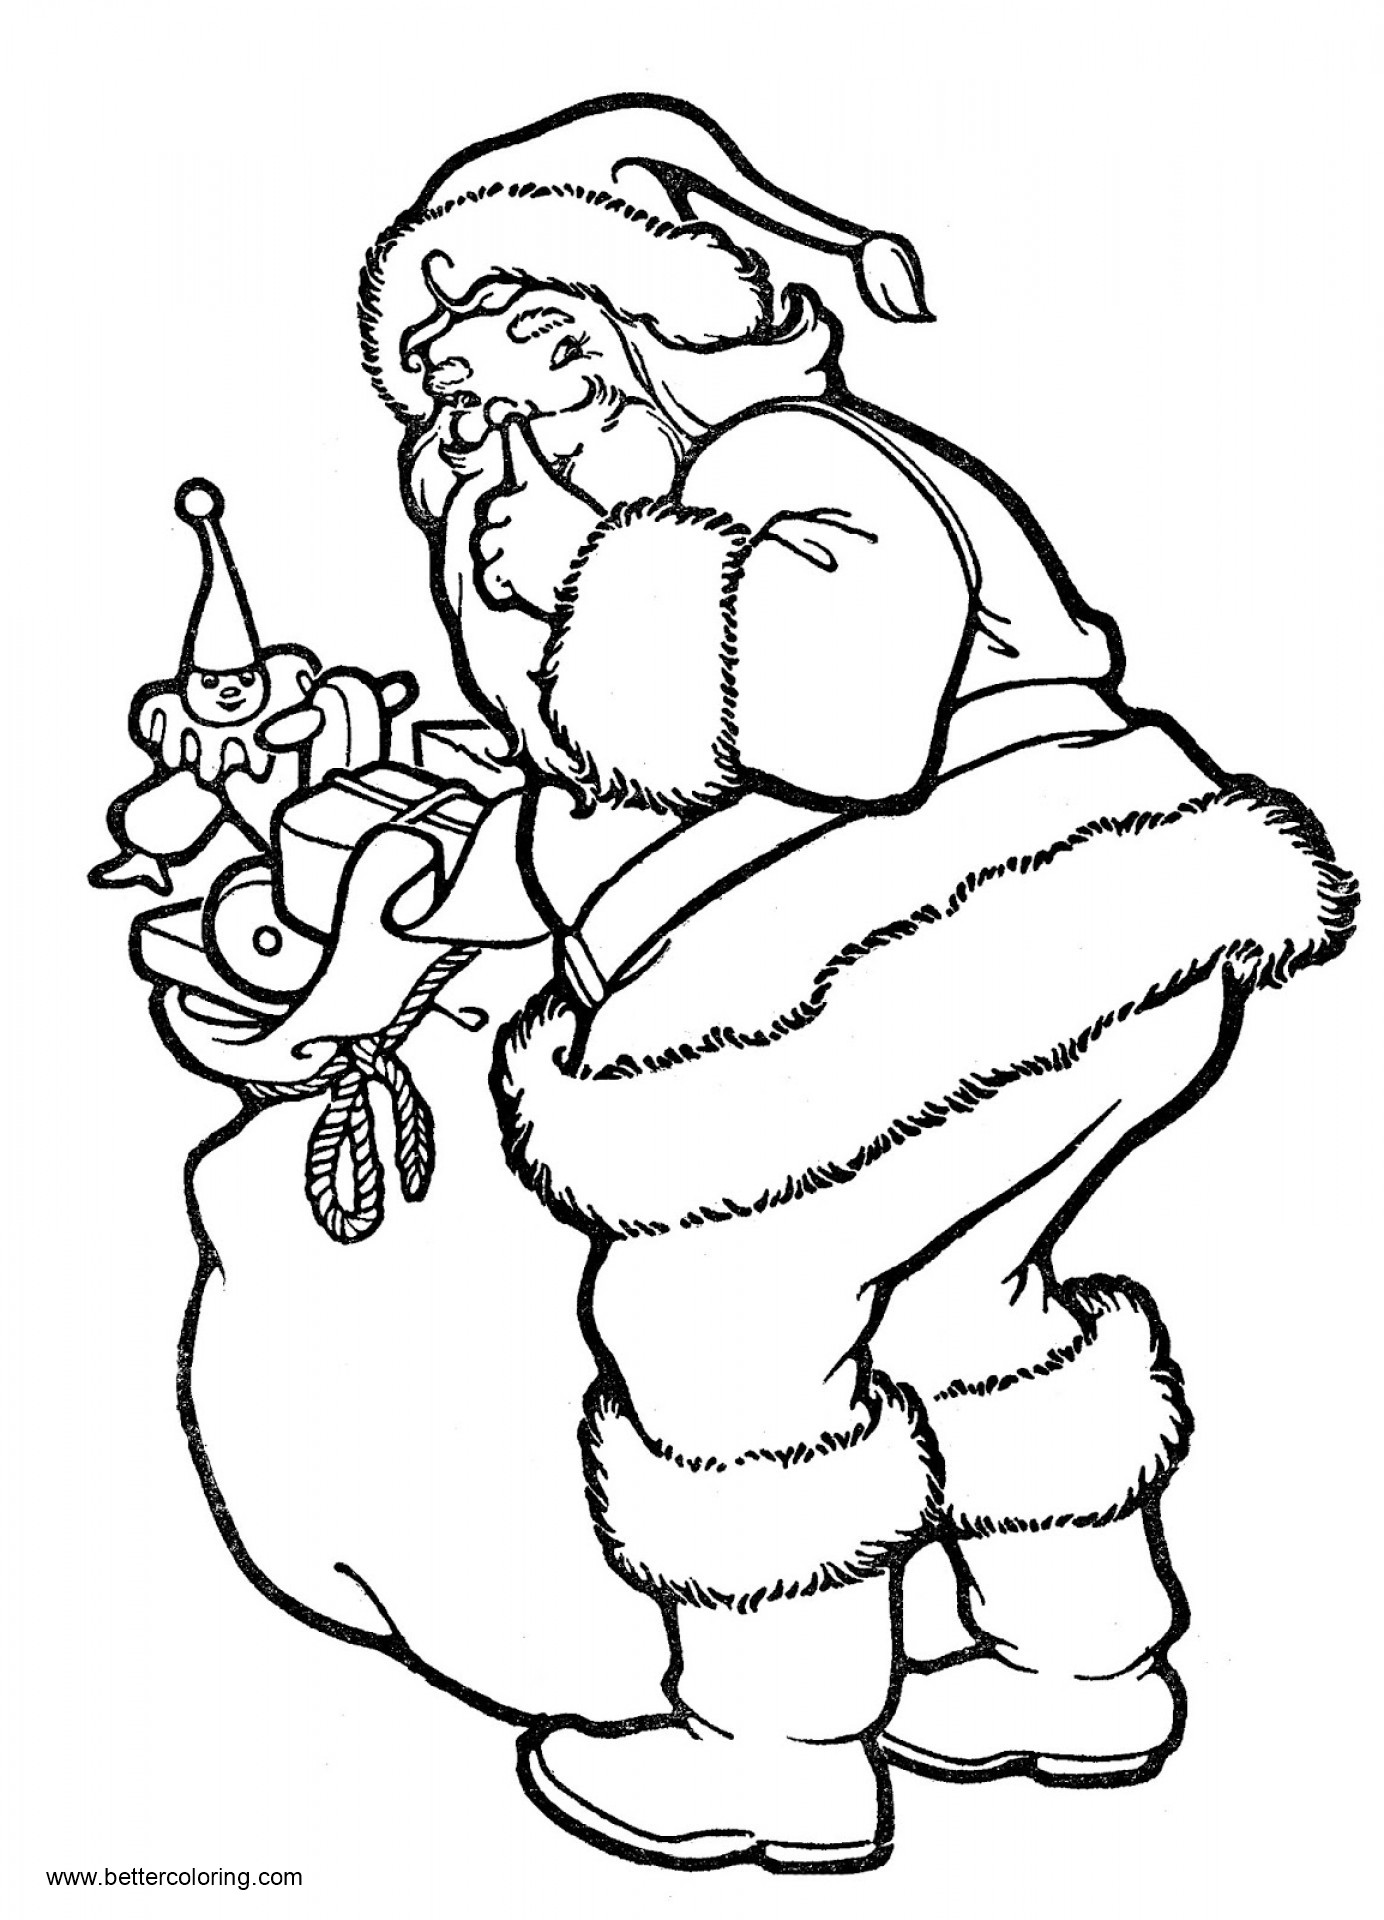 Christmas Coloring Pages Cute Santa With Toys Free Printable Coloring Pages